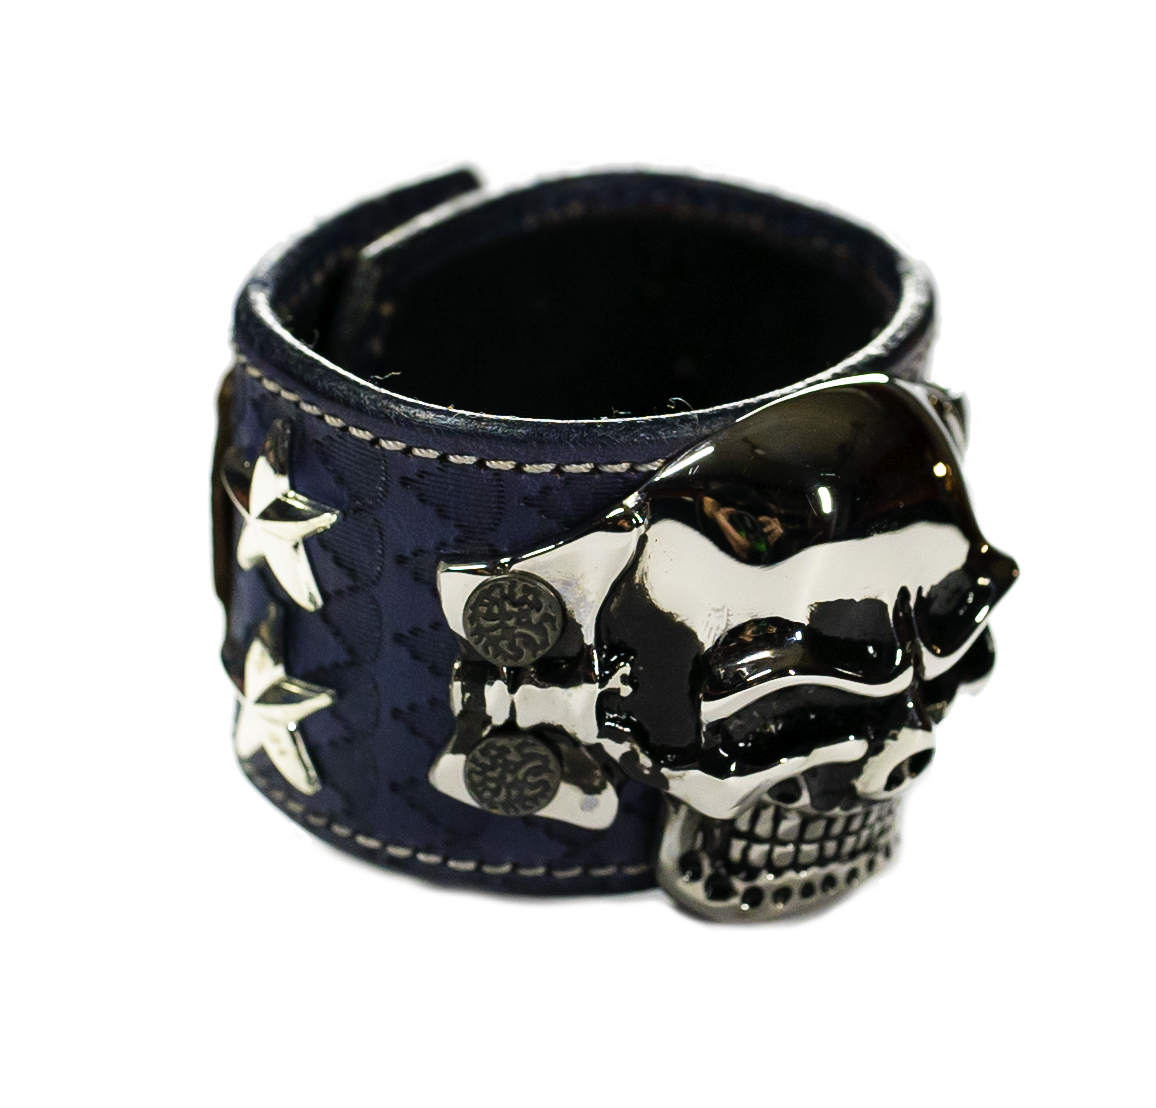 The Big Skull Navy Leather Cuff top view